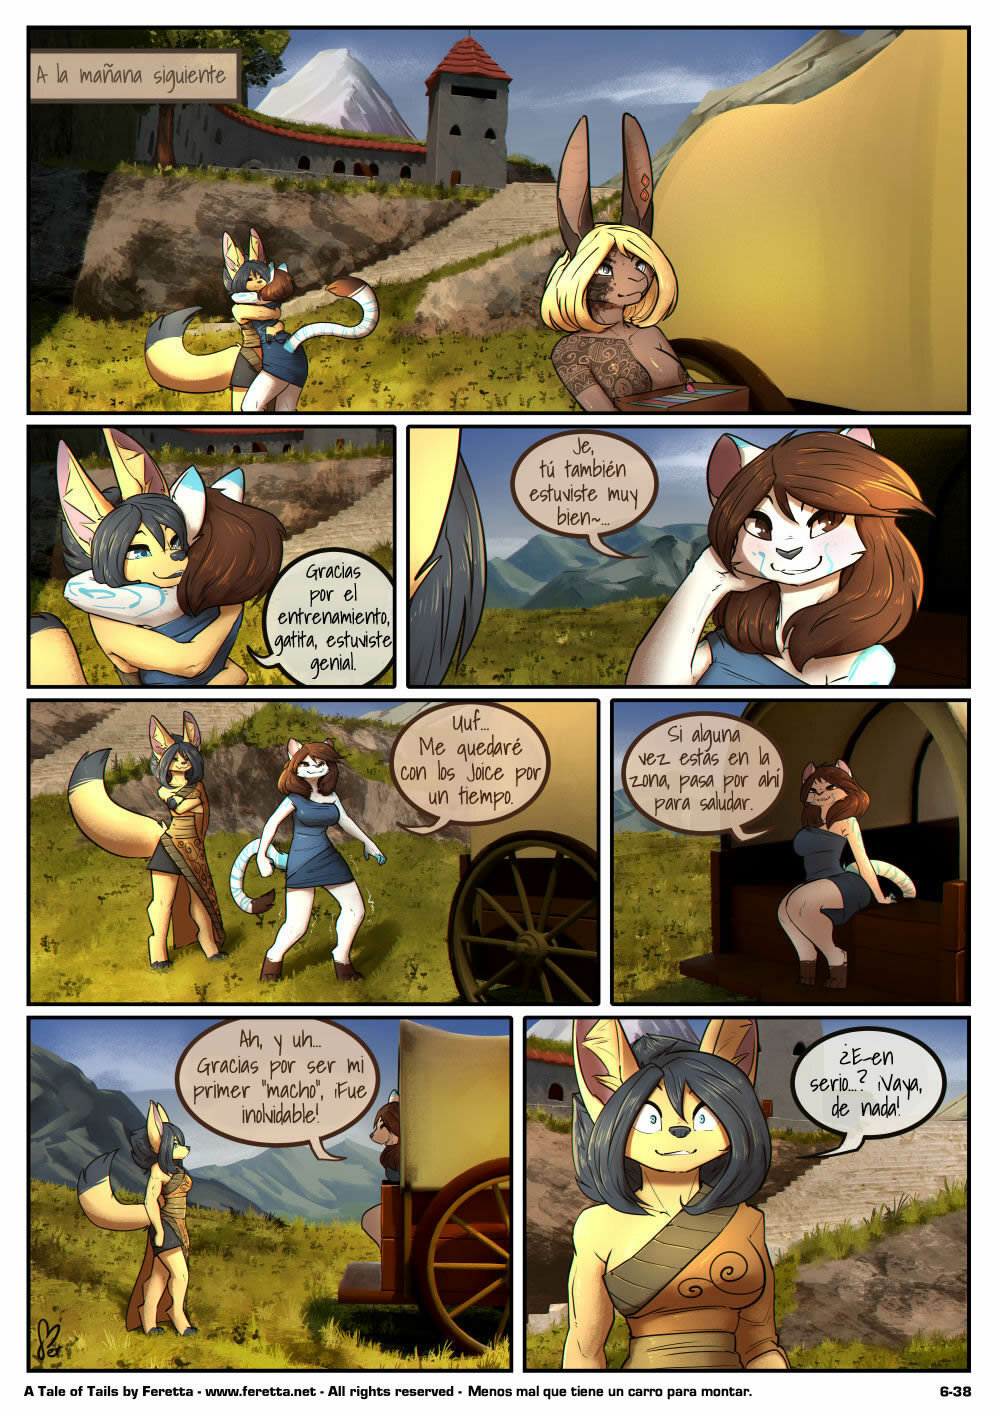 A tale of Tails 6 - 38